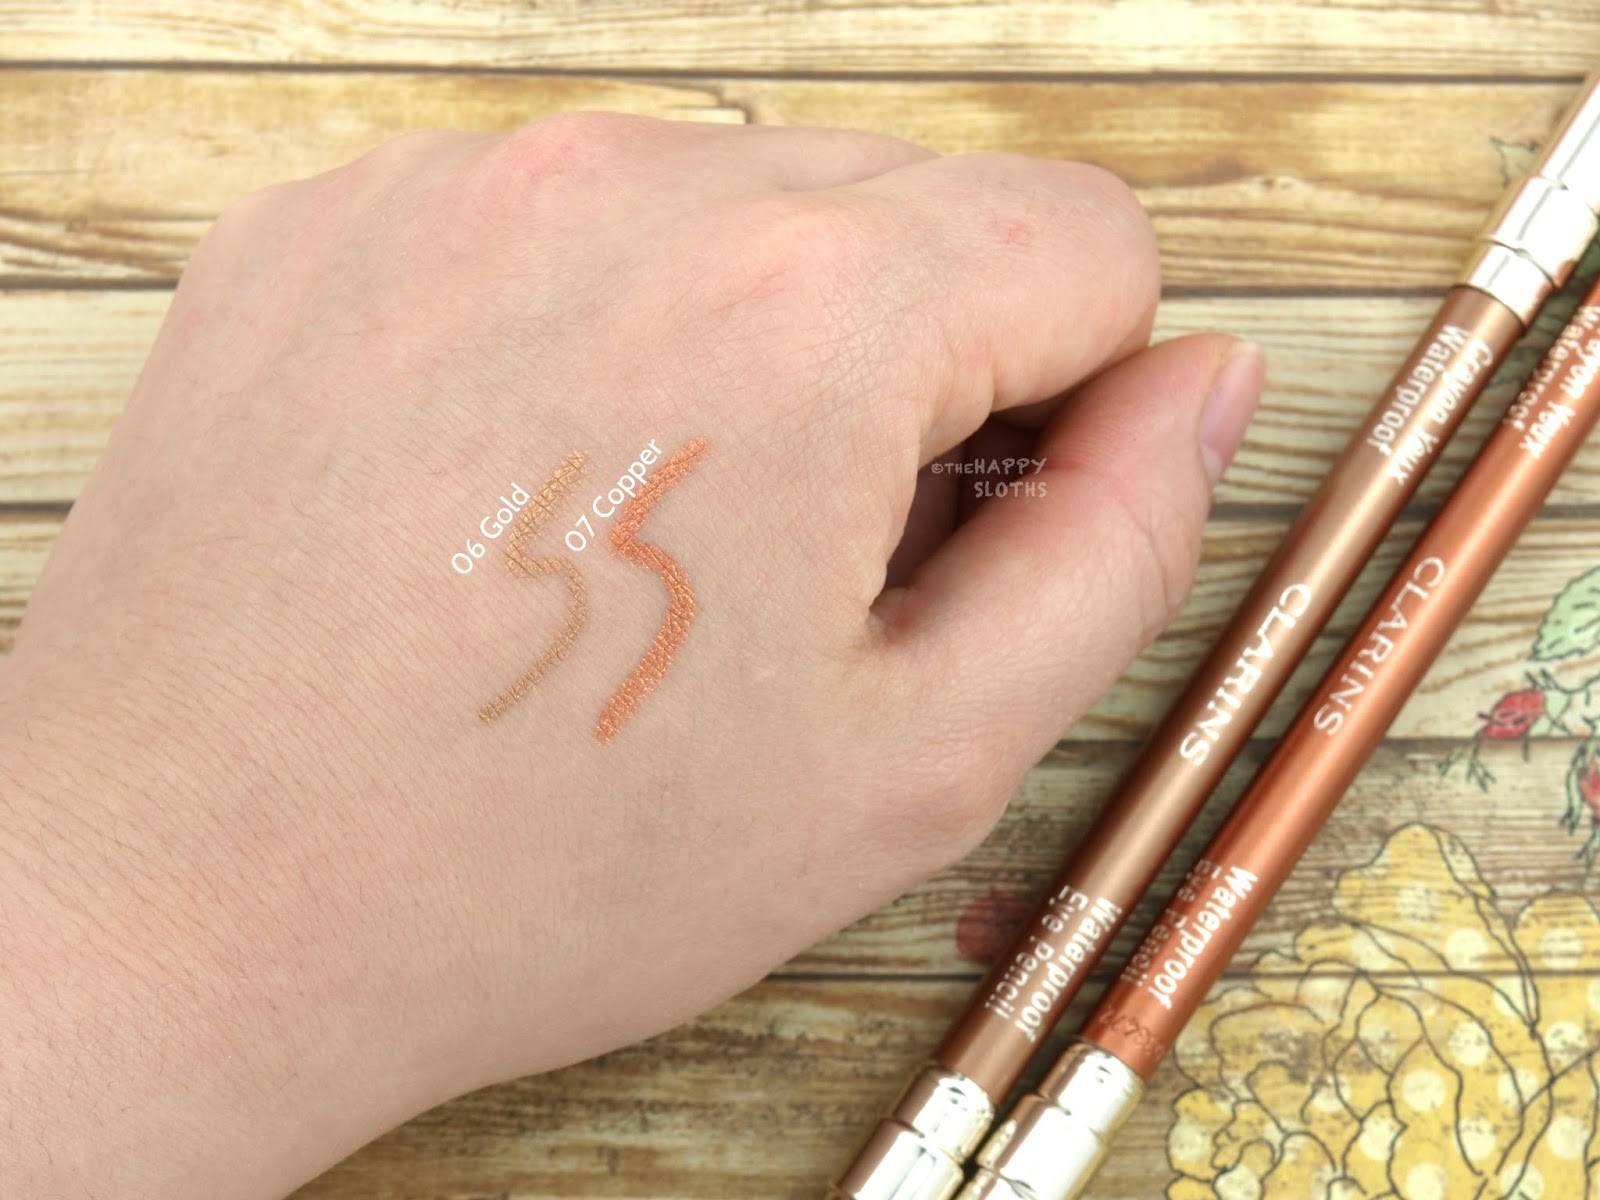 Clarins Summer 2017 Waterproof Eye Pencil: Review and Swatches